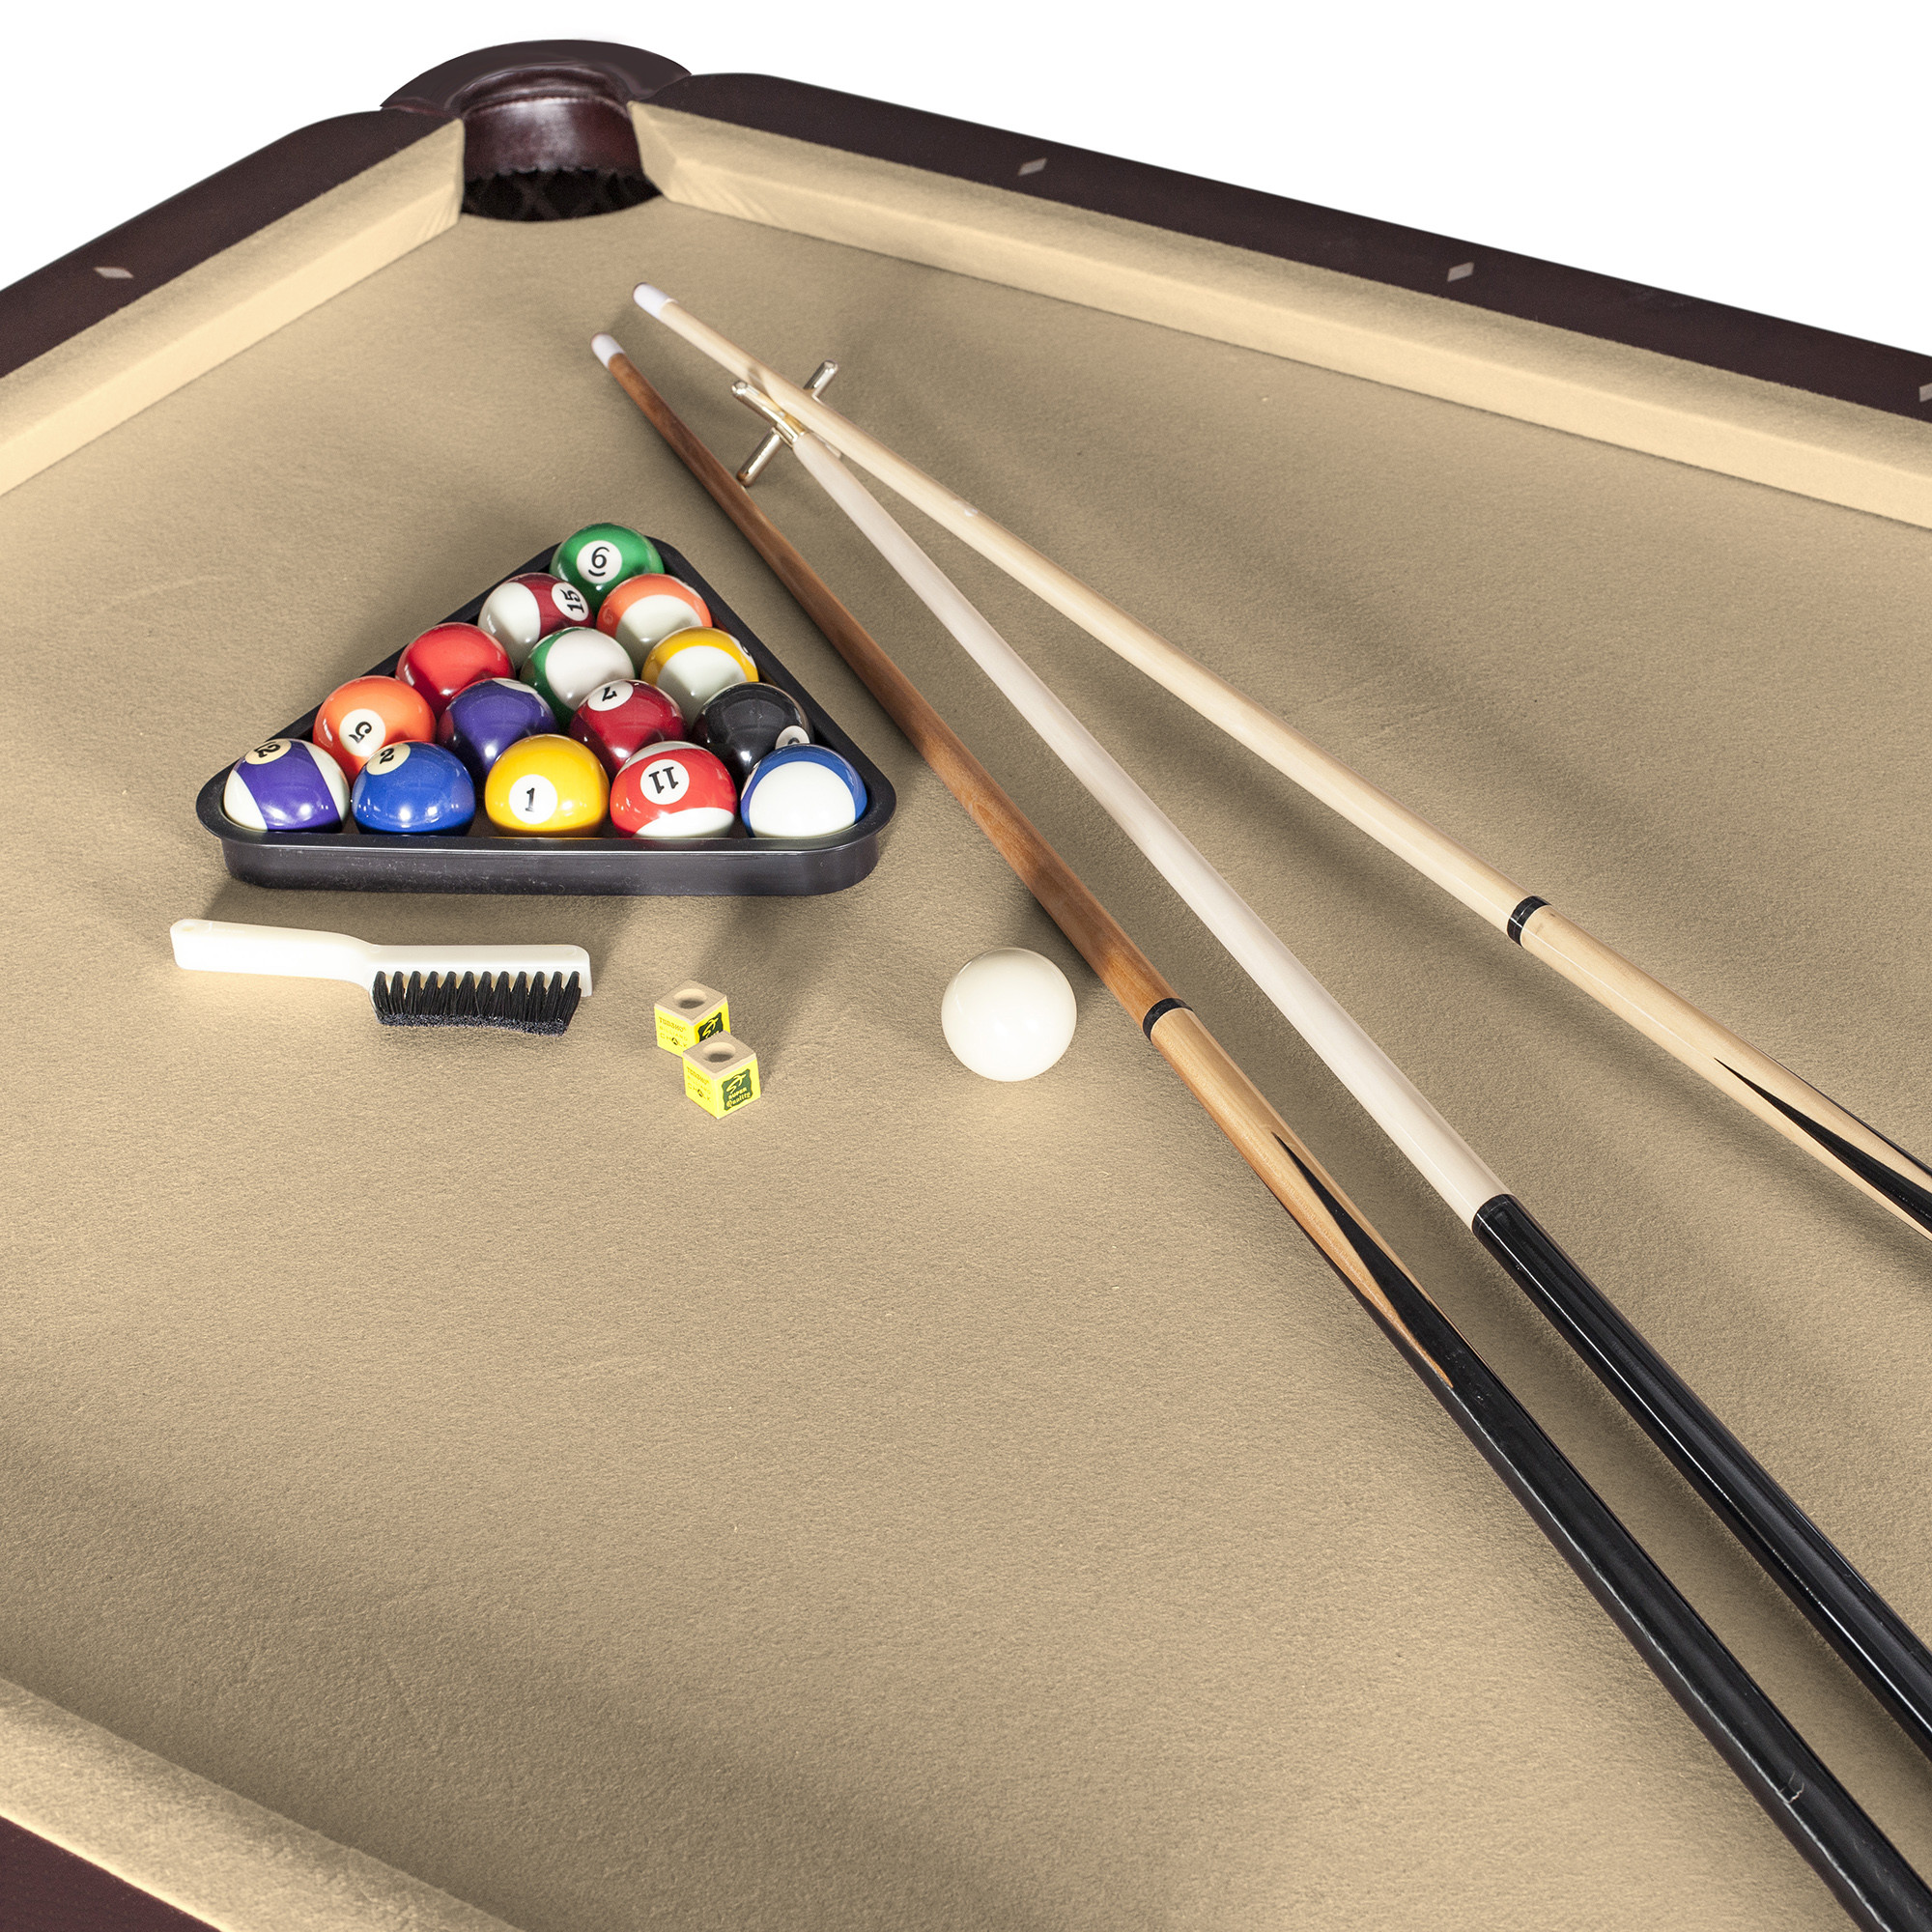 Hathaway Augusta 8 ft. Non-Slate Pool Table - Walnut Finish, 100.5-in l x 55-in w, Camel Felt - image 5 of 14